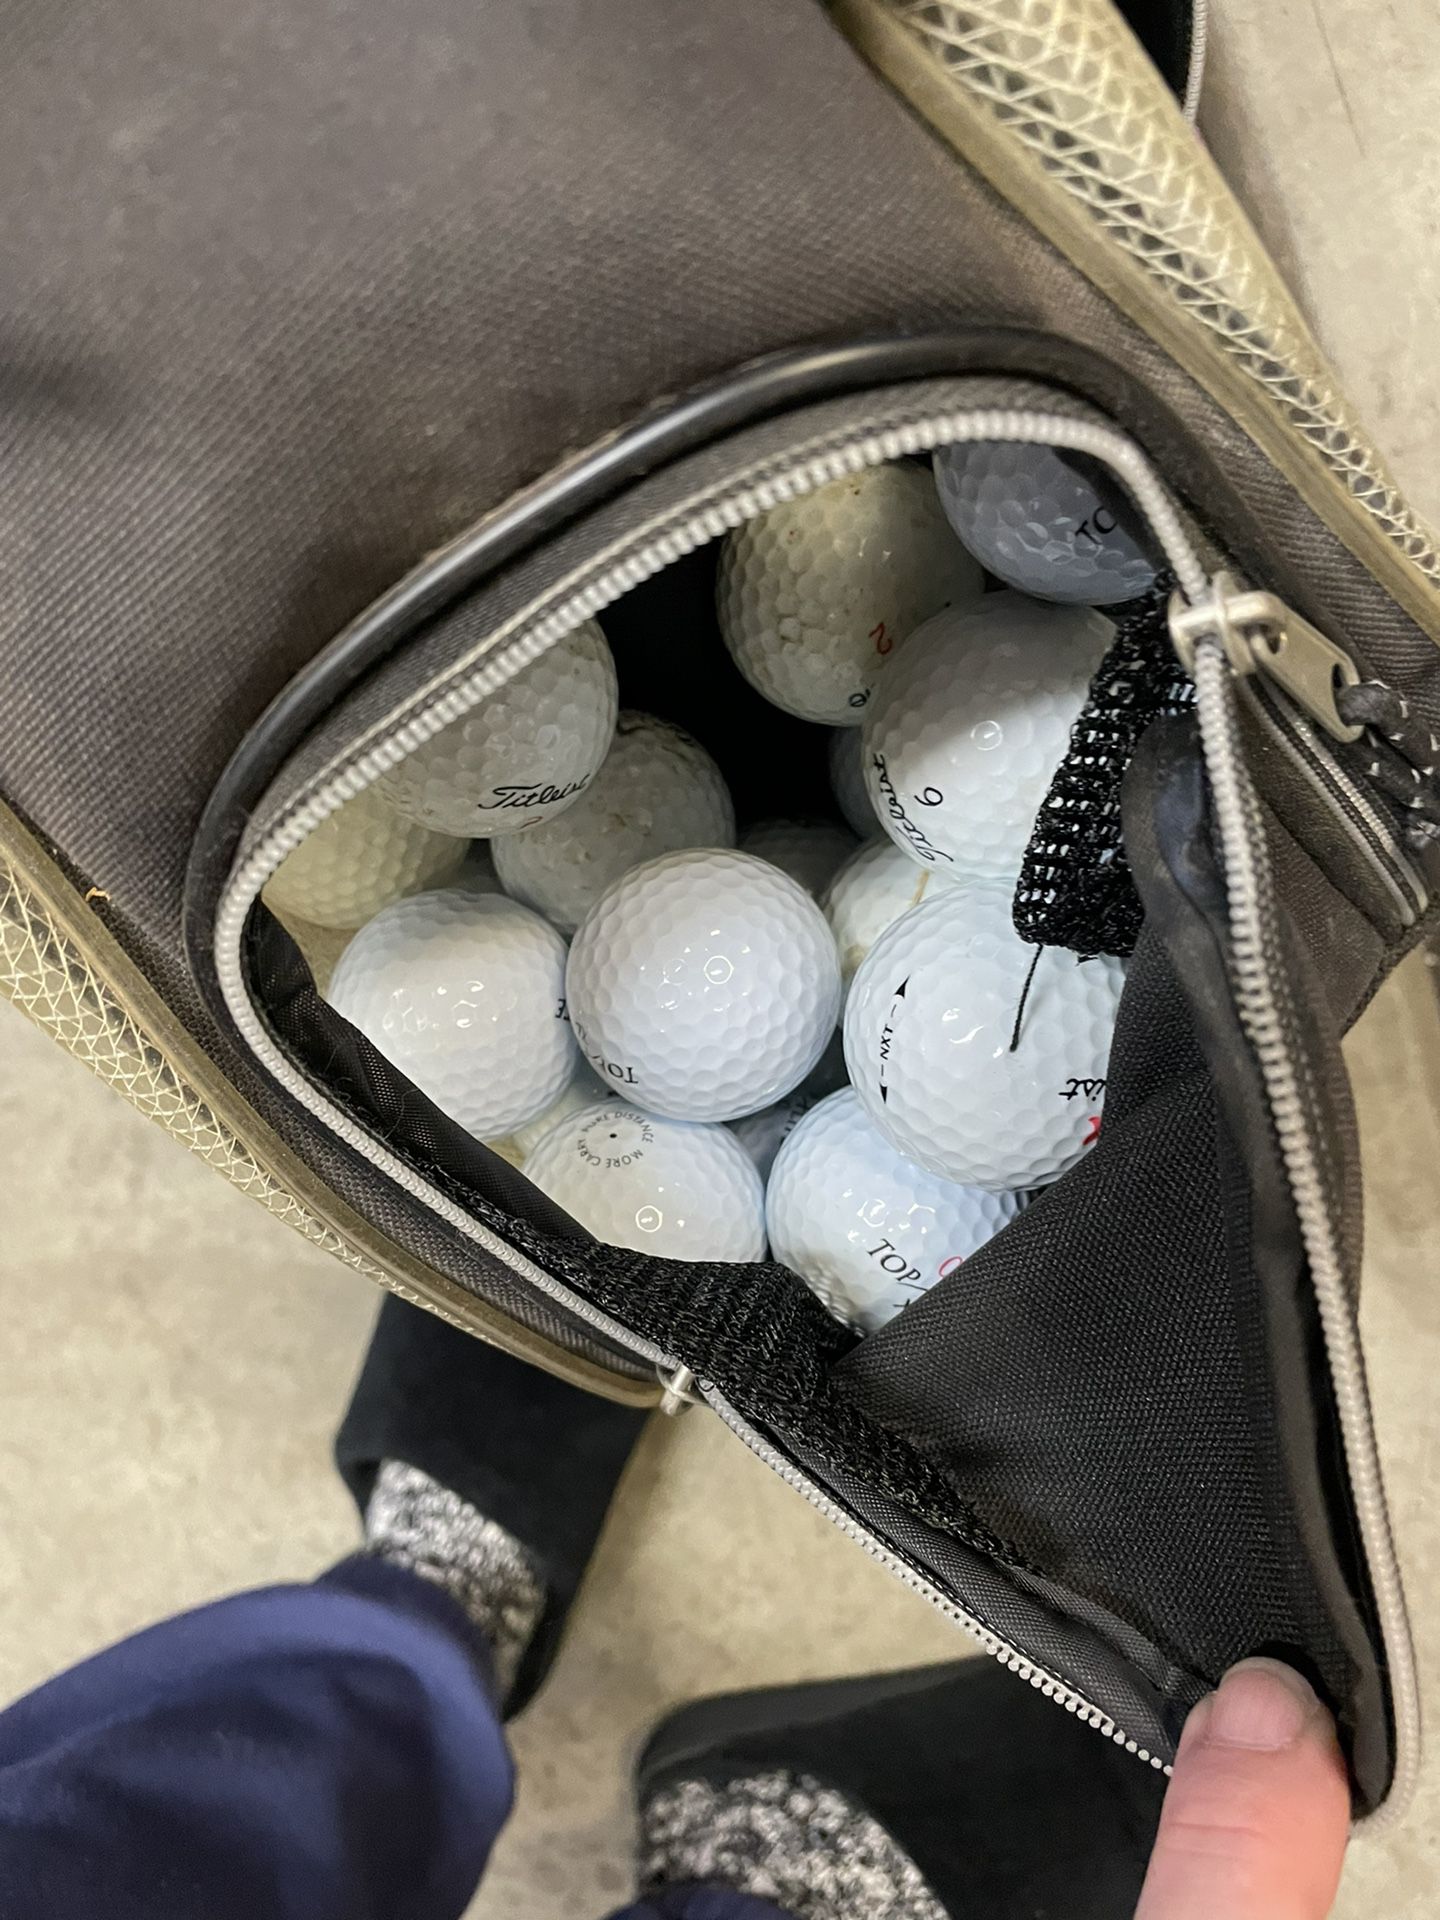 Gulf Clubs With  bag, Balls And Tees 